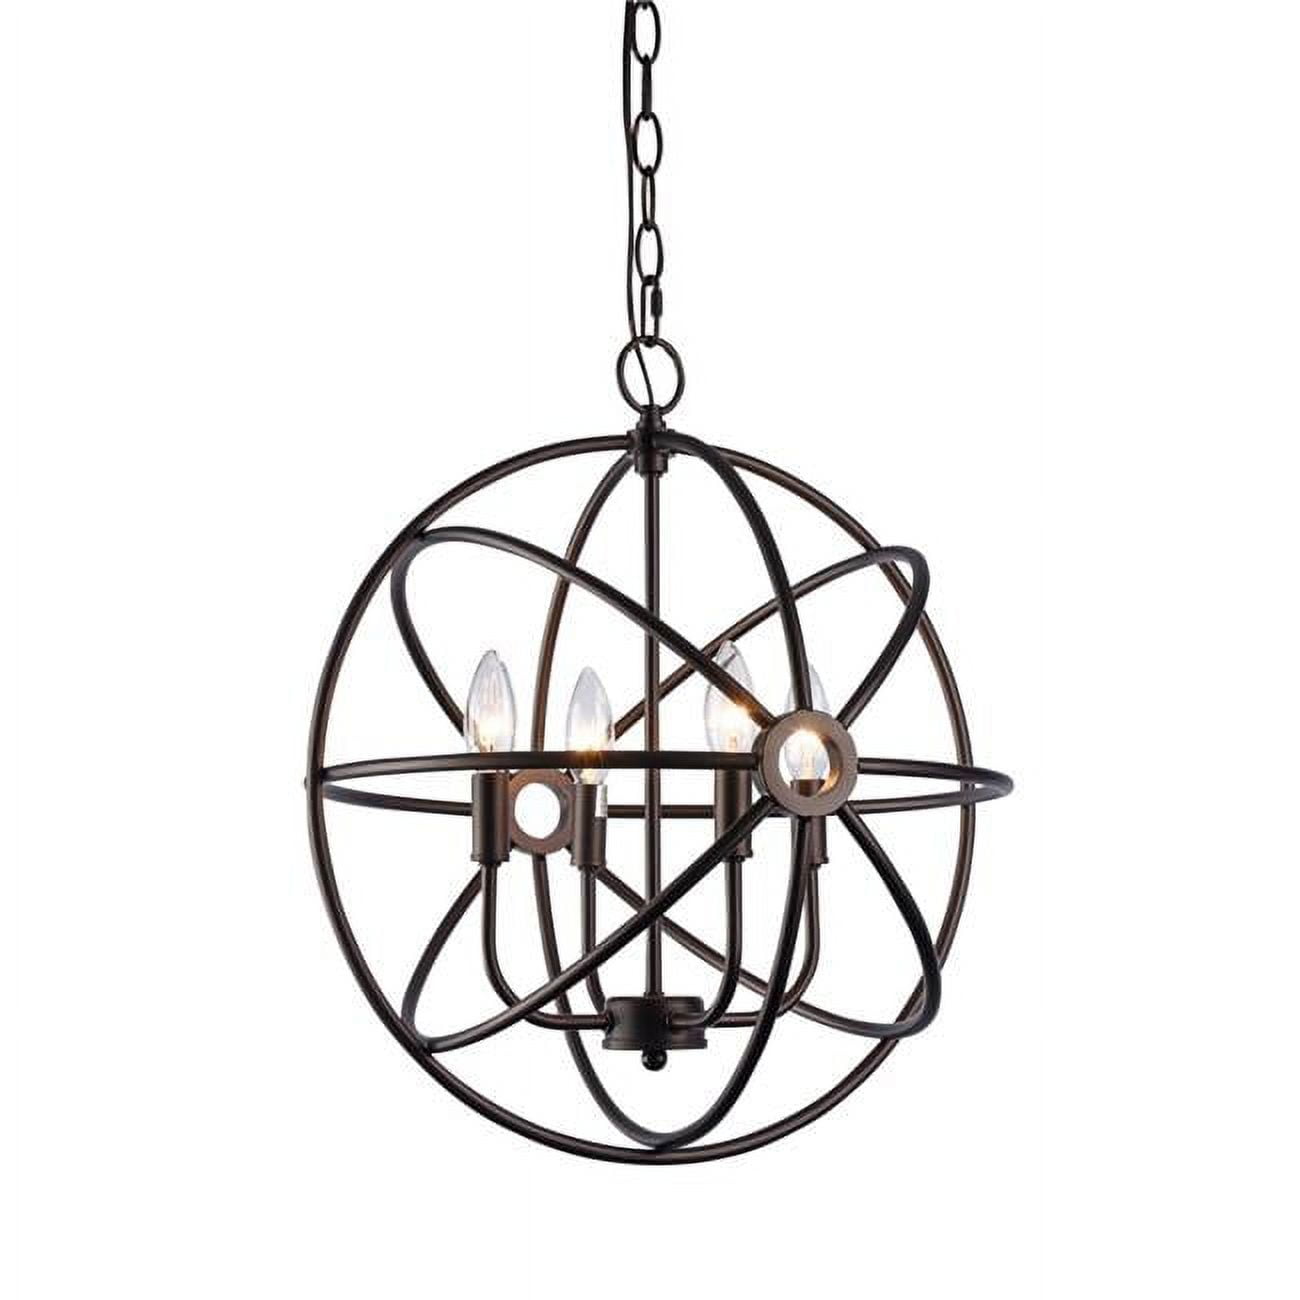 Ch59038rb16-up4 16 In. Lighting Ironclad Industrial-style 4 Light Rubbed Bronze Ceiling Pendant - Oil Rubbed Bronze